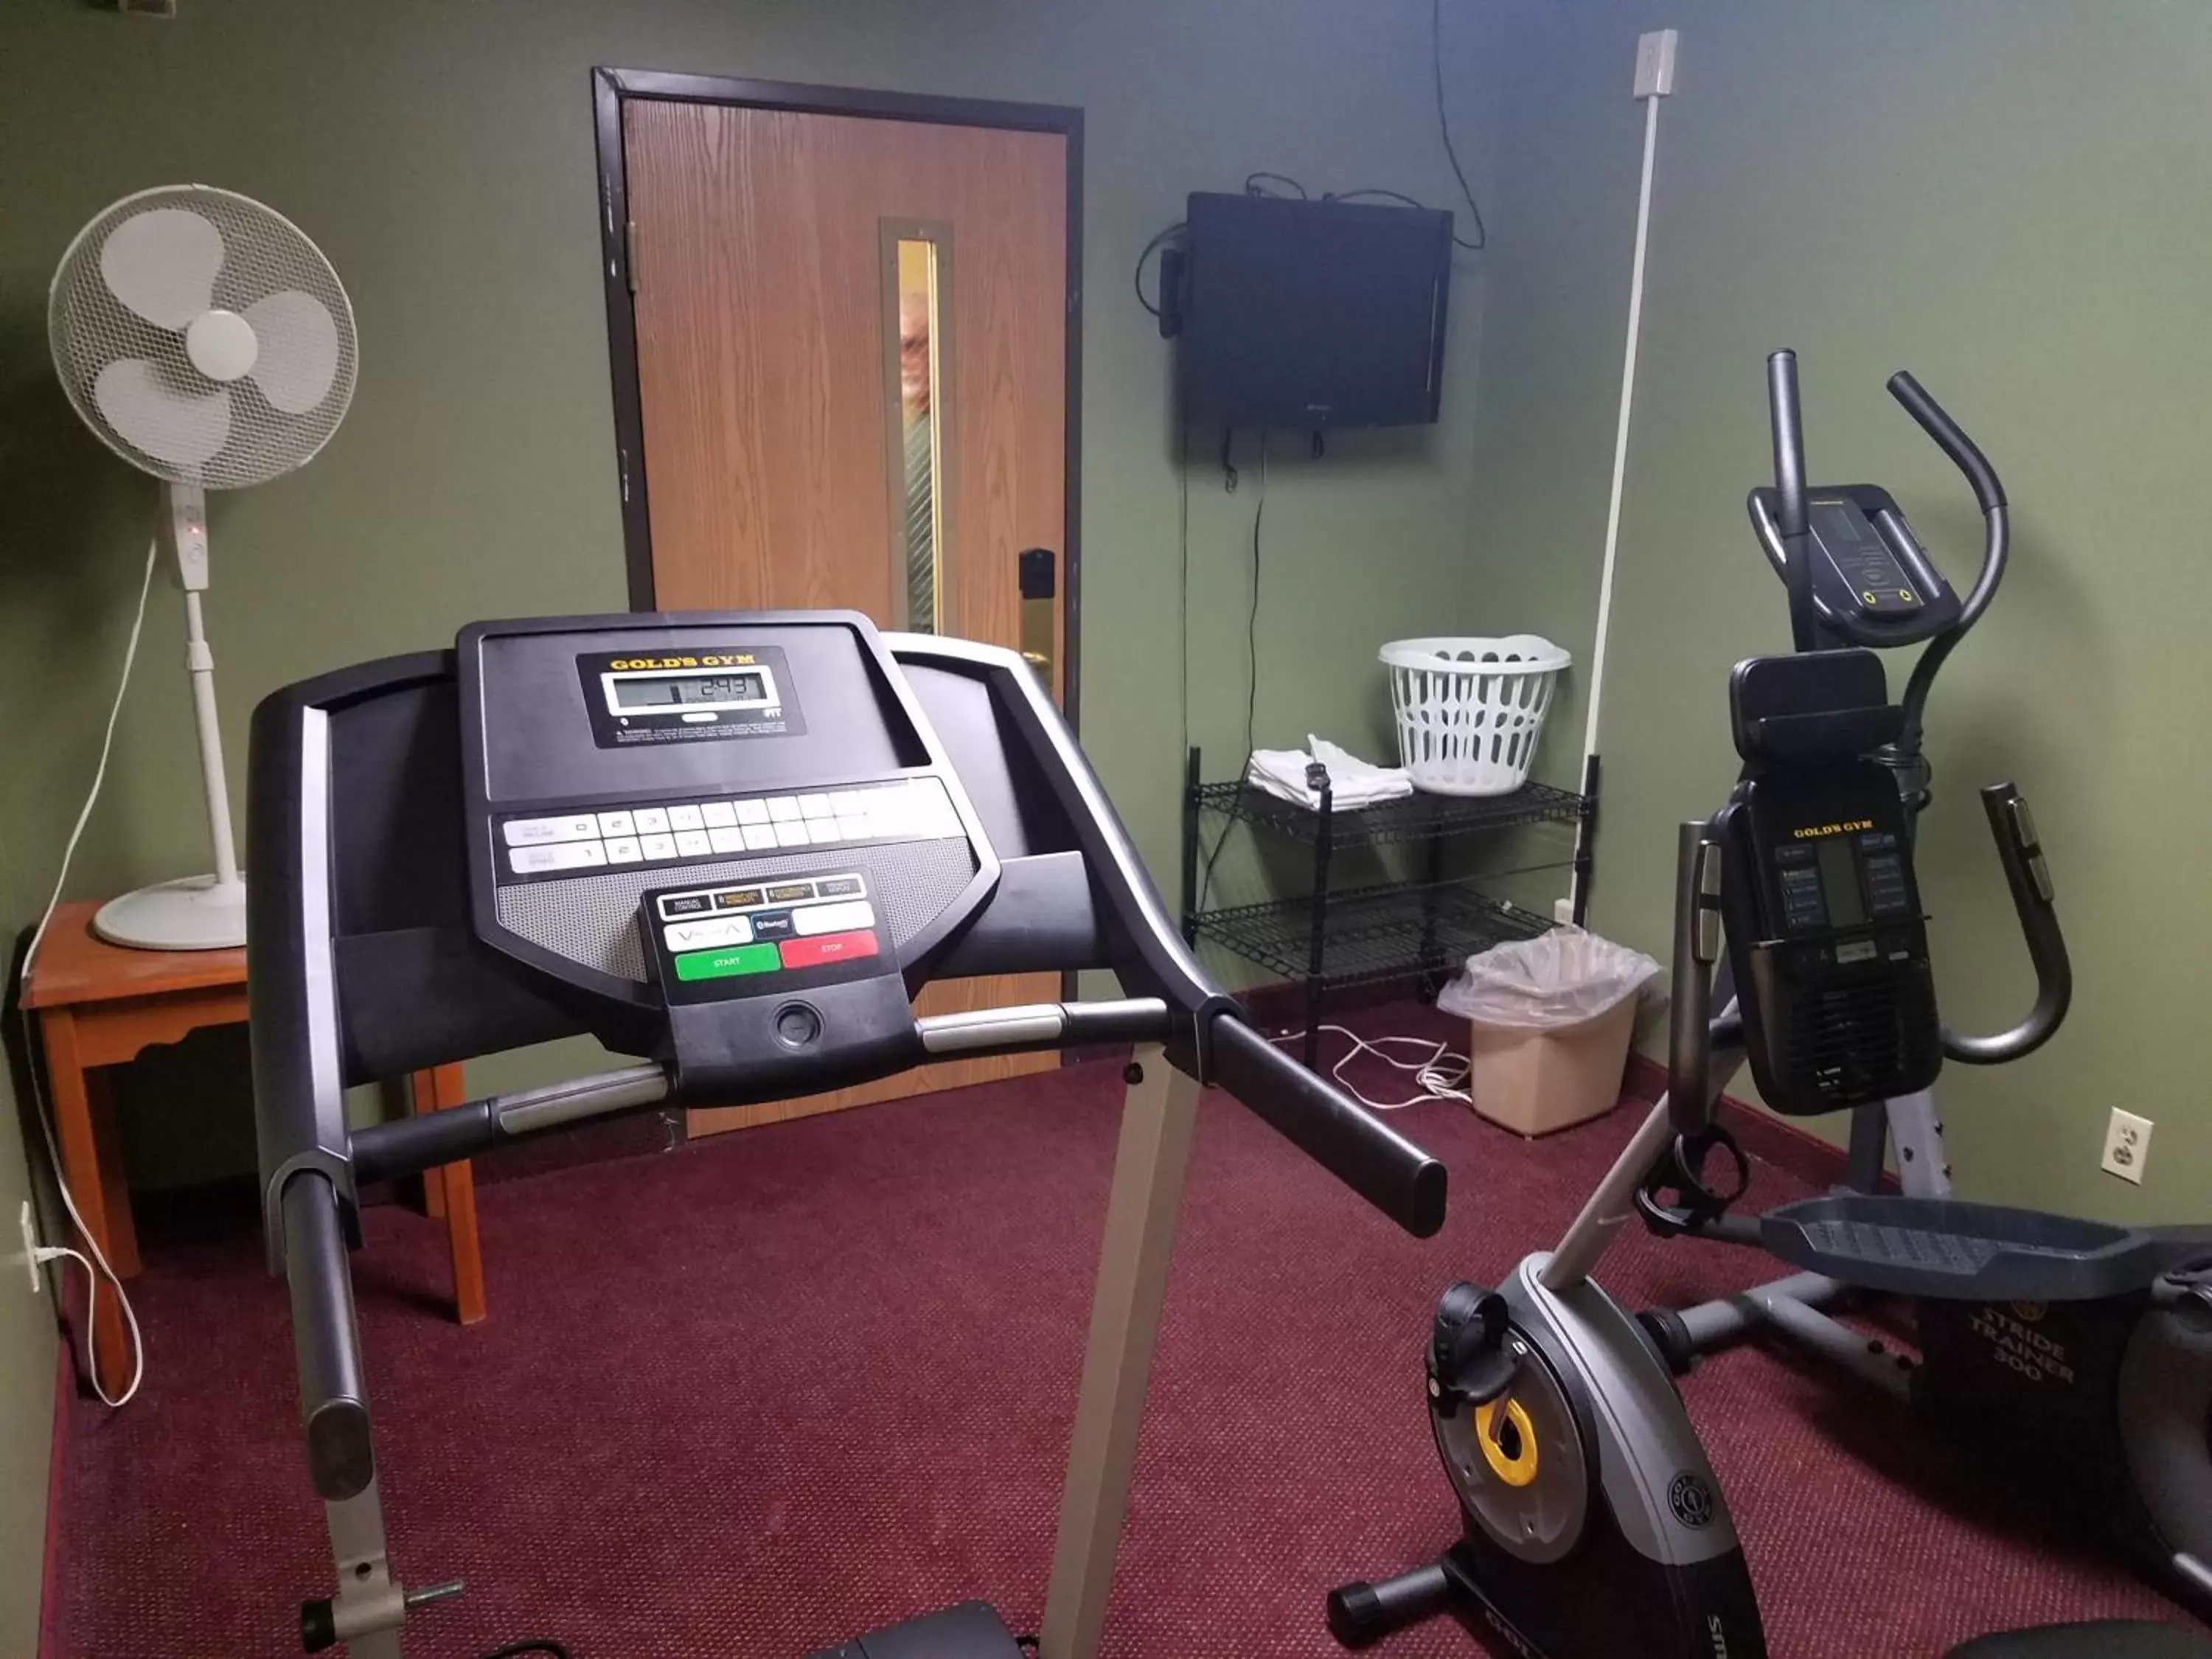 Fitness centre/facilities, Fitness Center/Facilities in Governors Inn a Travelodge by Wyndham